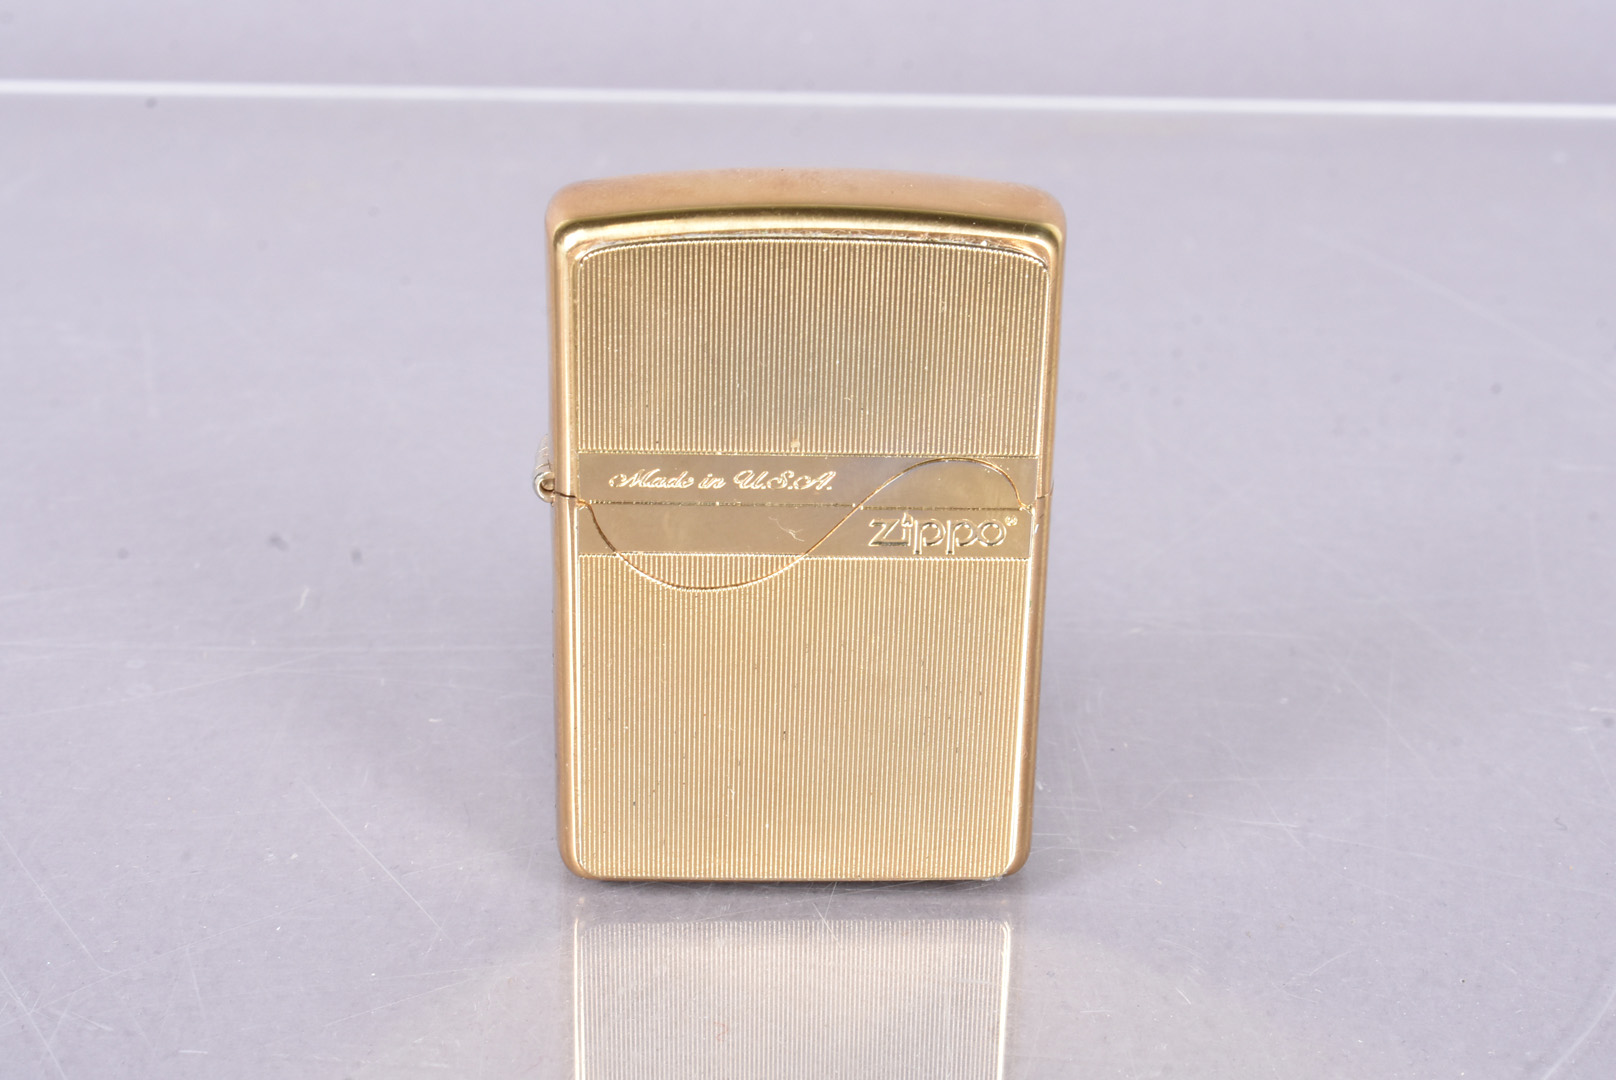 A 2020 engine worked brass 'Made in USA' Zippo lighter, for the Japanese market